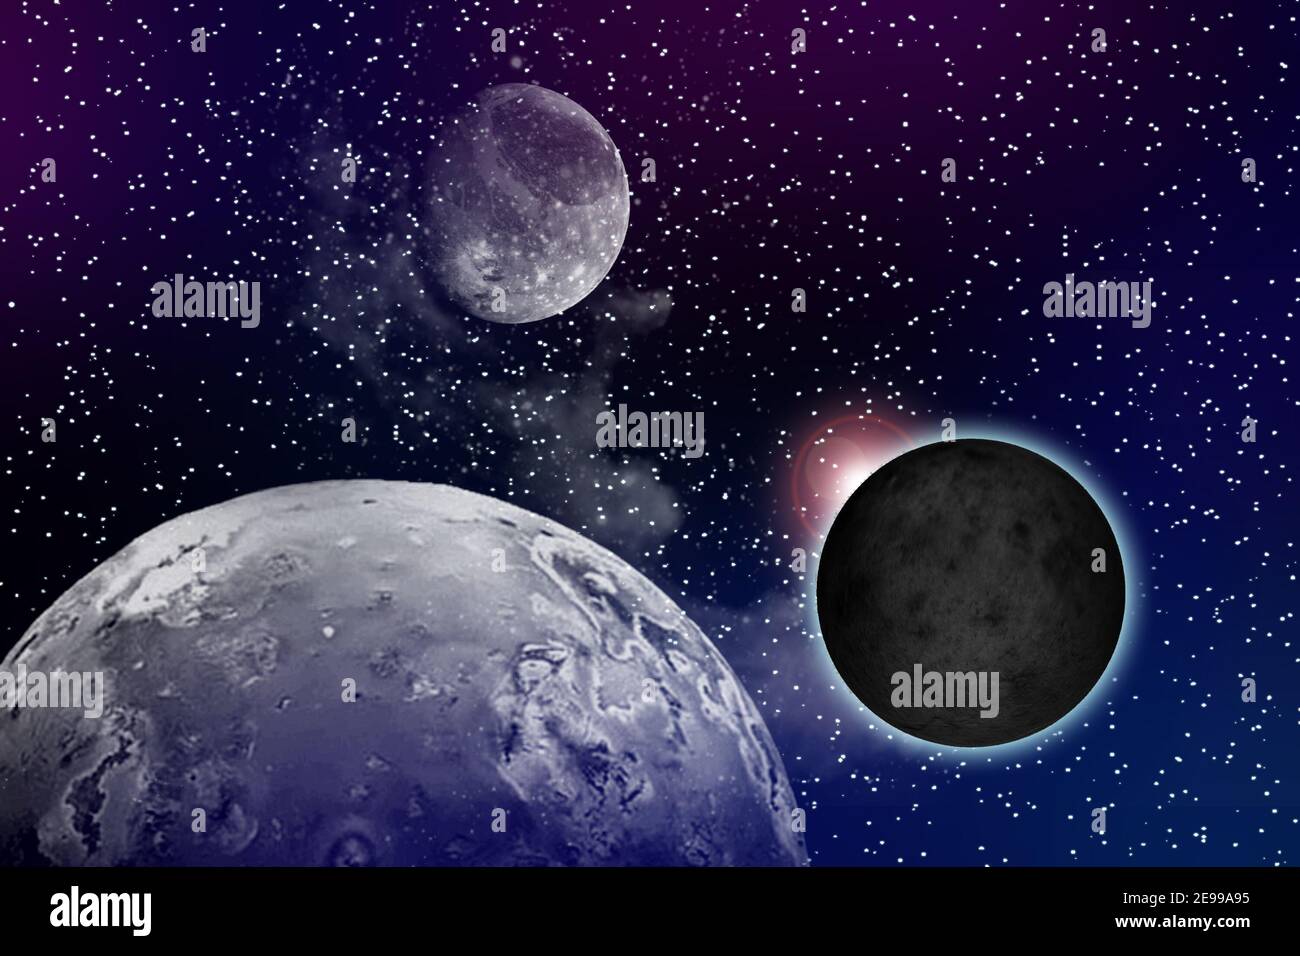 Astrology astronomy earth moon space big bang solar system planet creation. Stock Photo